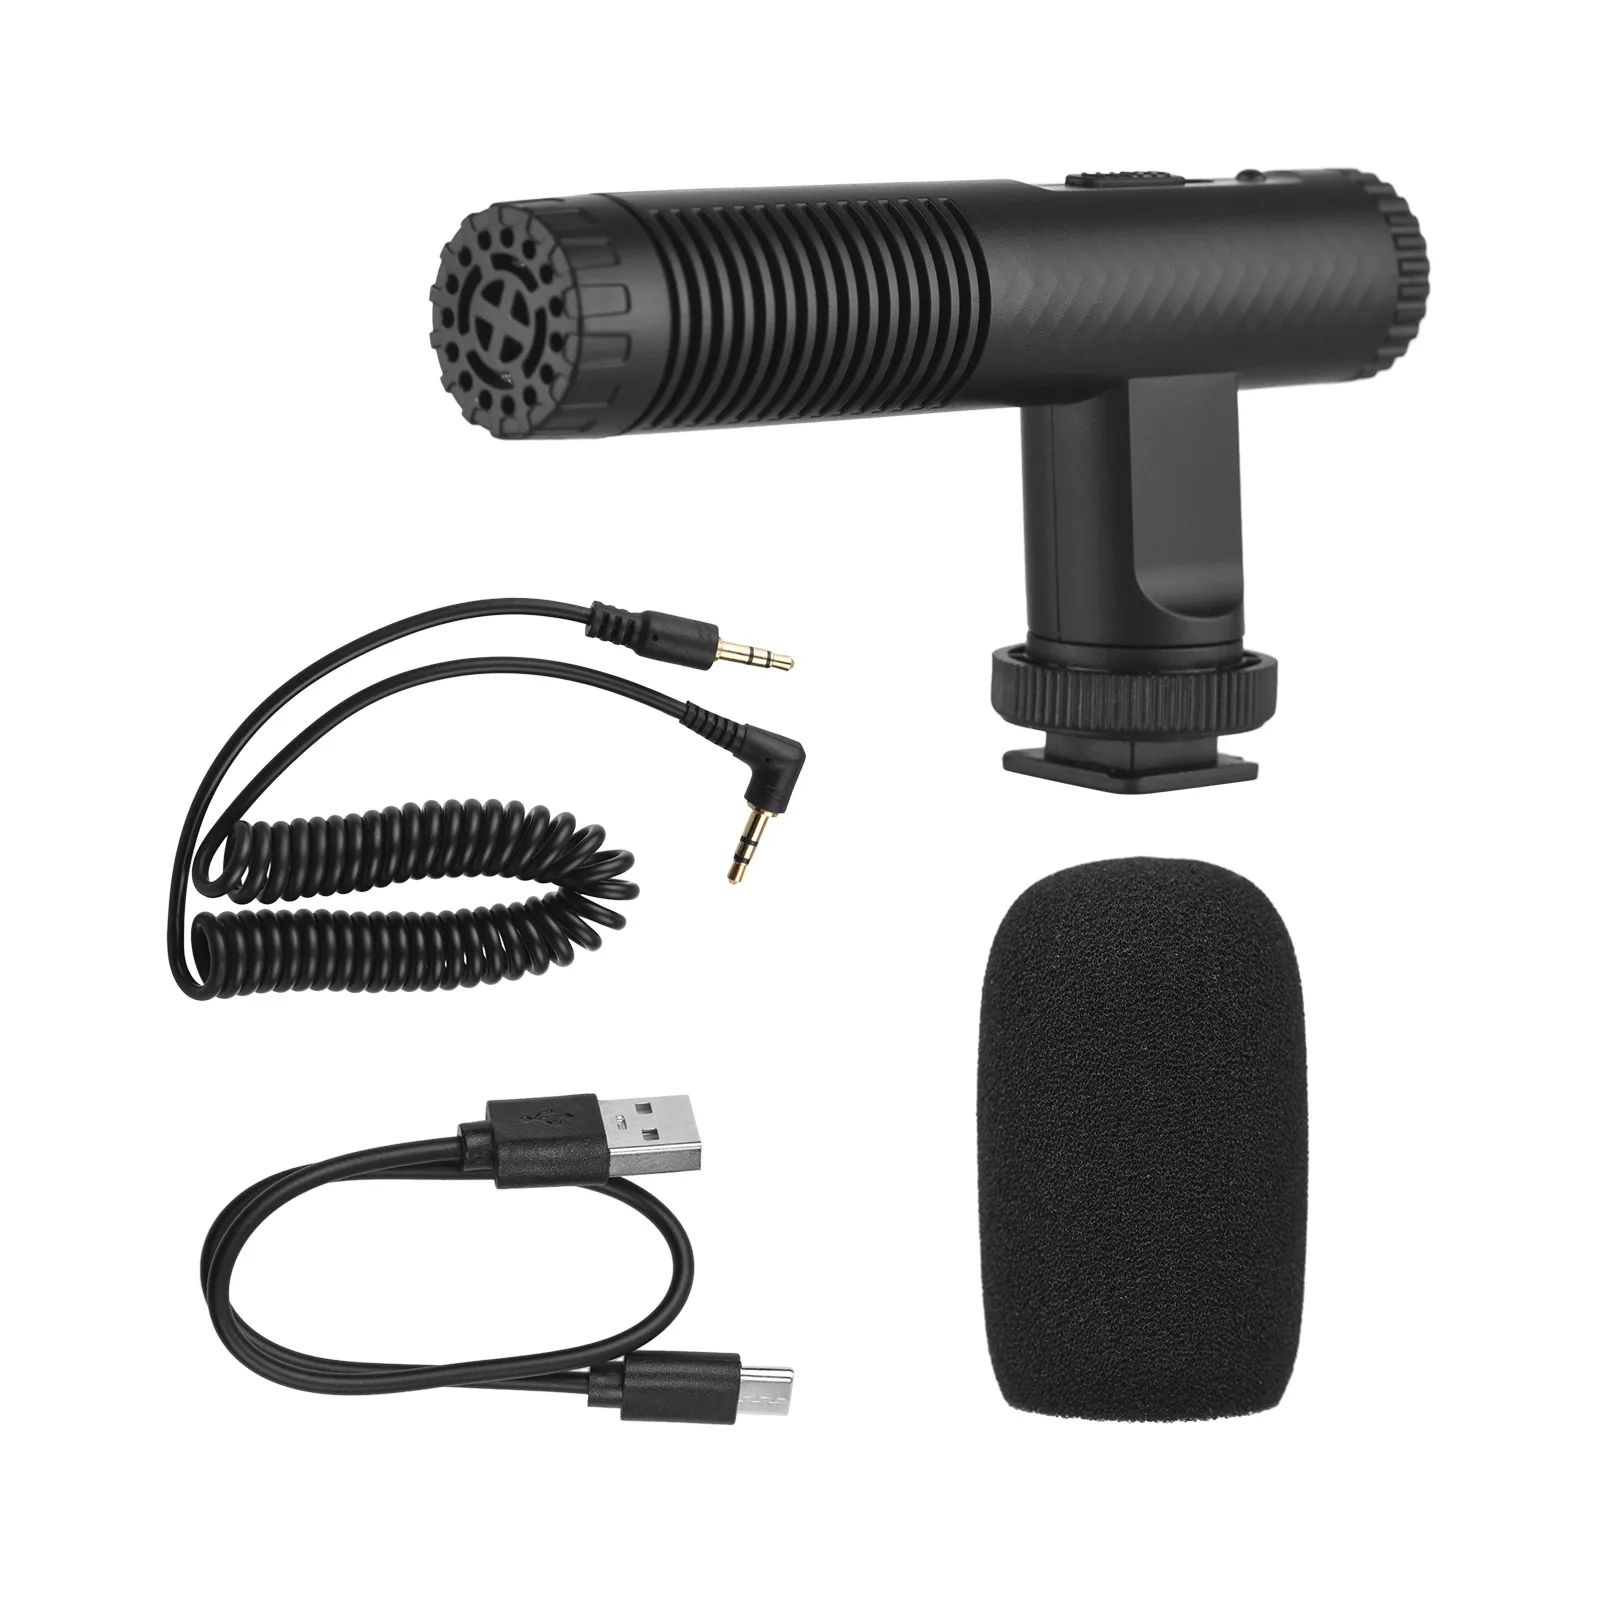 

Portable Stereo Microphone Video Recording Mic Mini Mic 3.5mm TRS Plug Built-in Rechargeable Battery for DSLR Cameras Camcorder